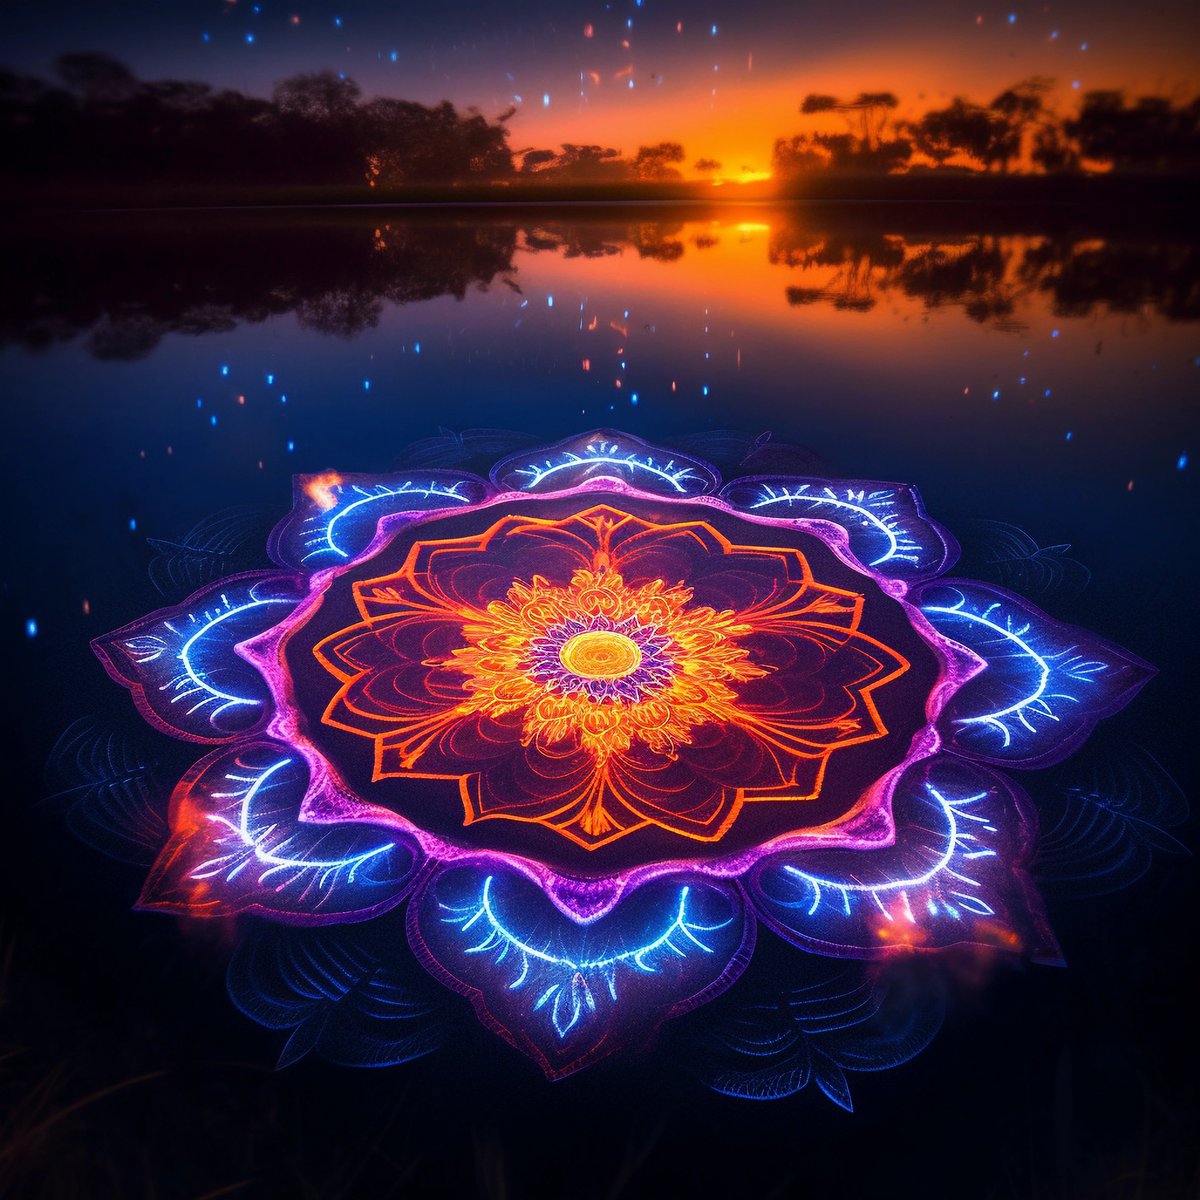 Thought how would fractals themed rangoli look on a water. Turns out, it does look great. - Upscaled with Bigjpg.com